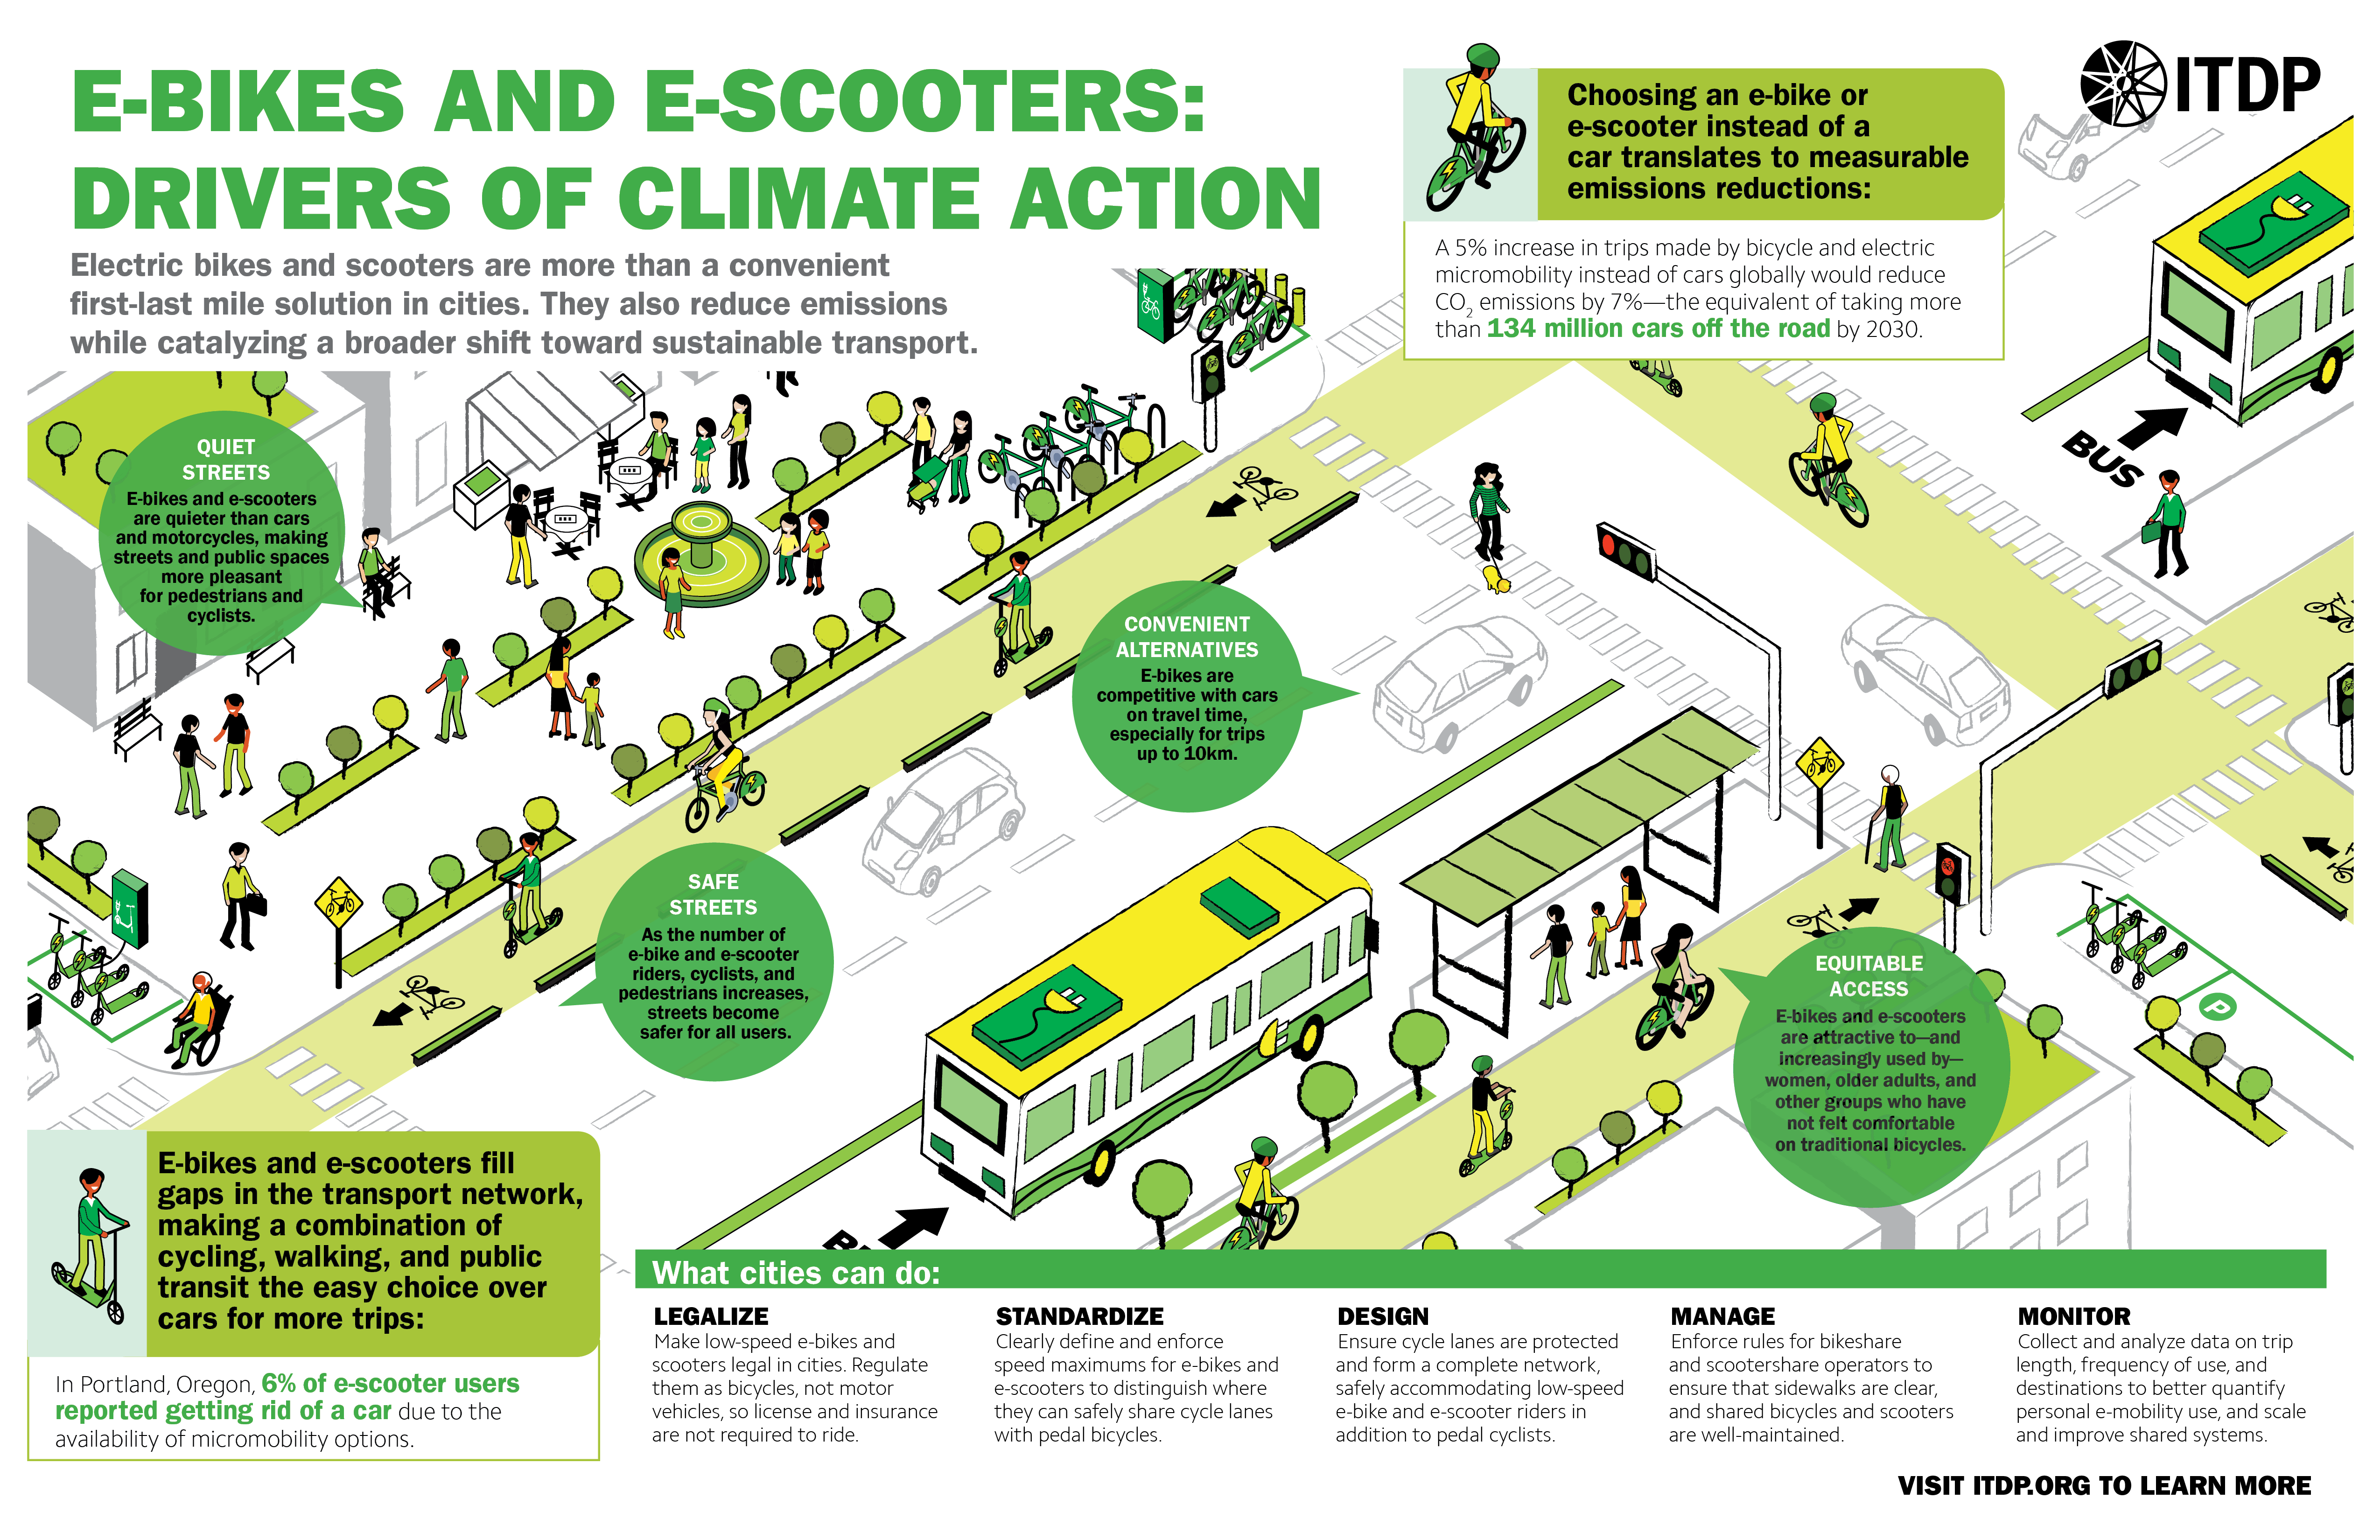 E-bikes and E-scooters: Drivers of Climate Action